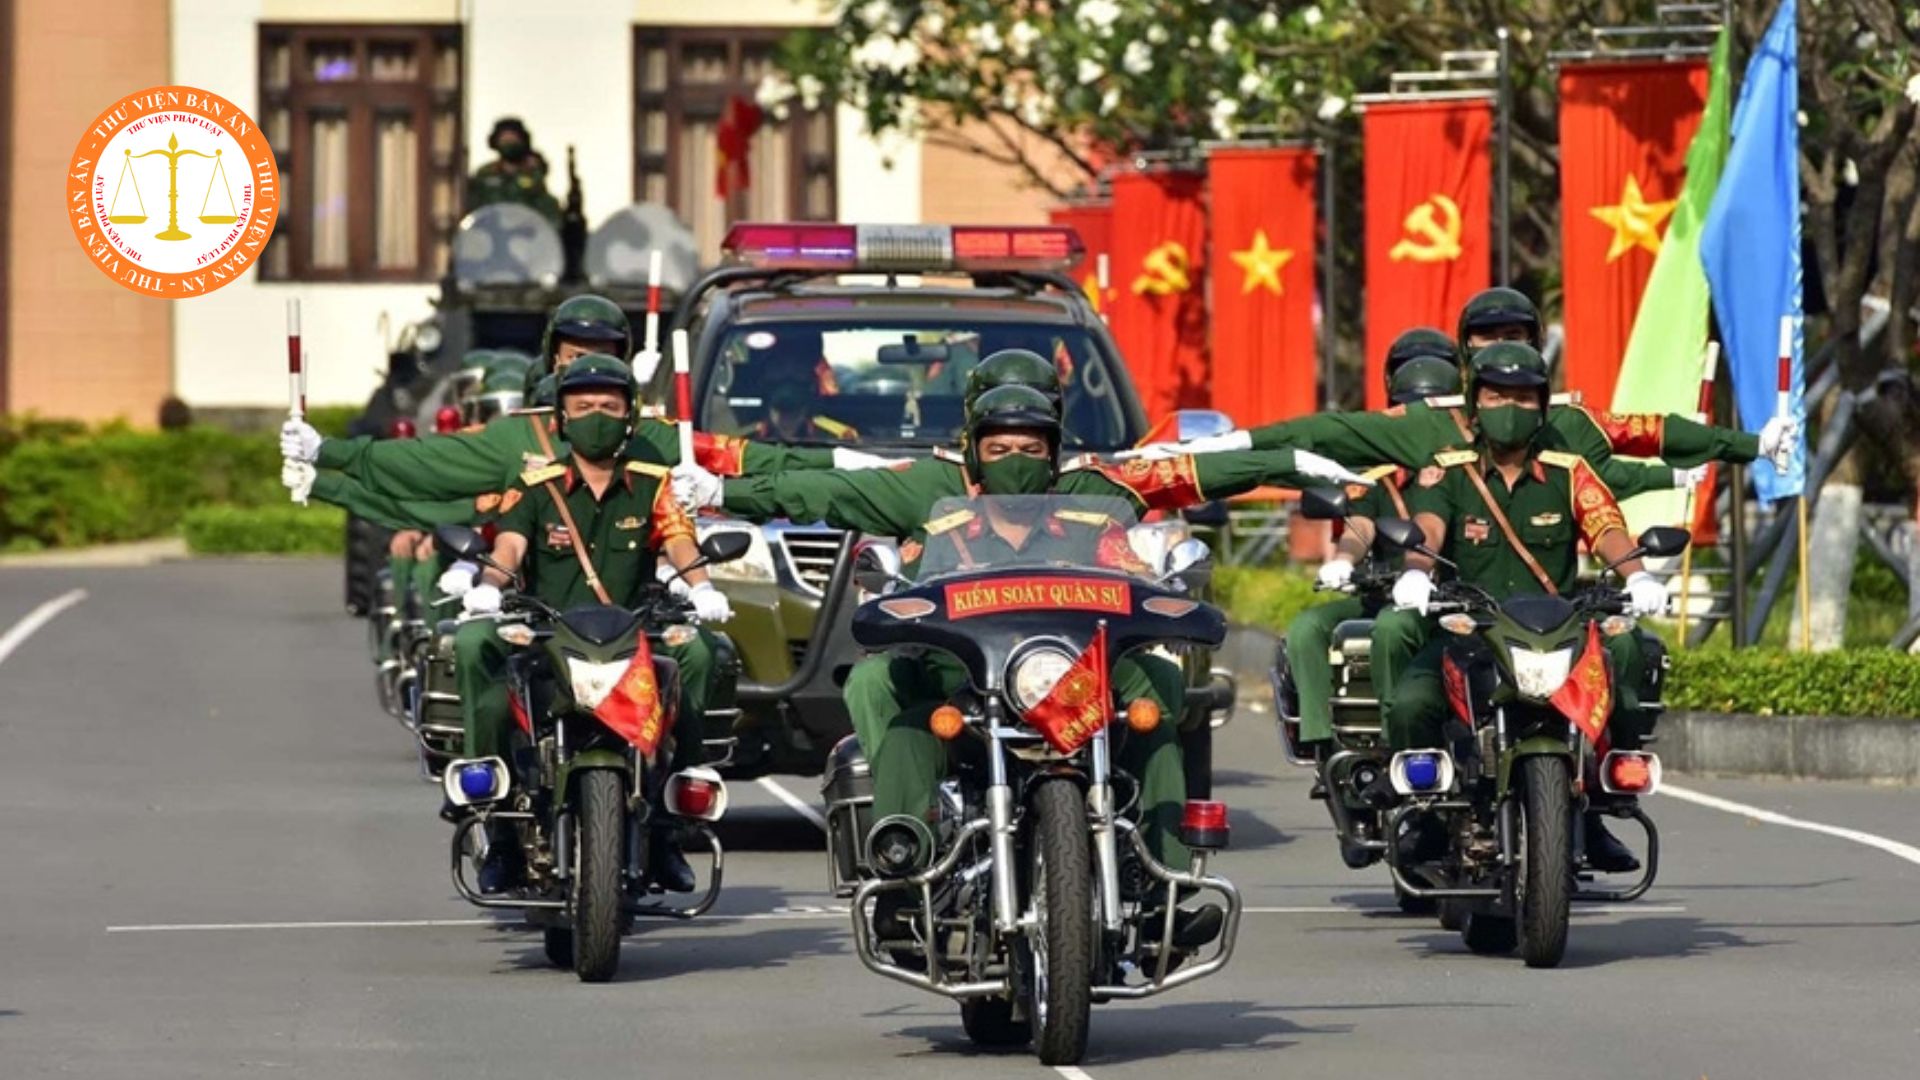 To strengthen military control and discipline military personnel in Vietnam